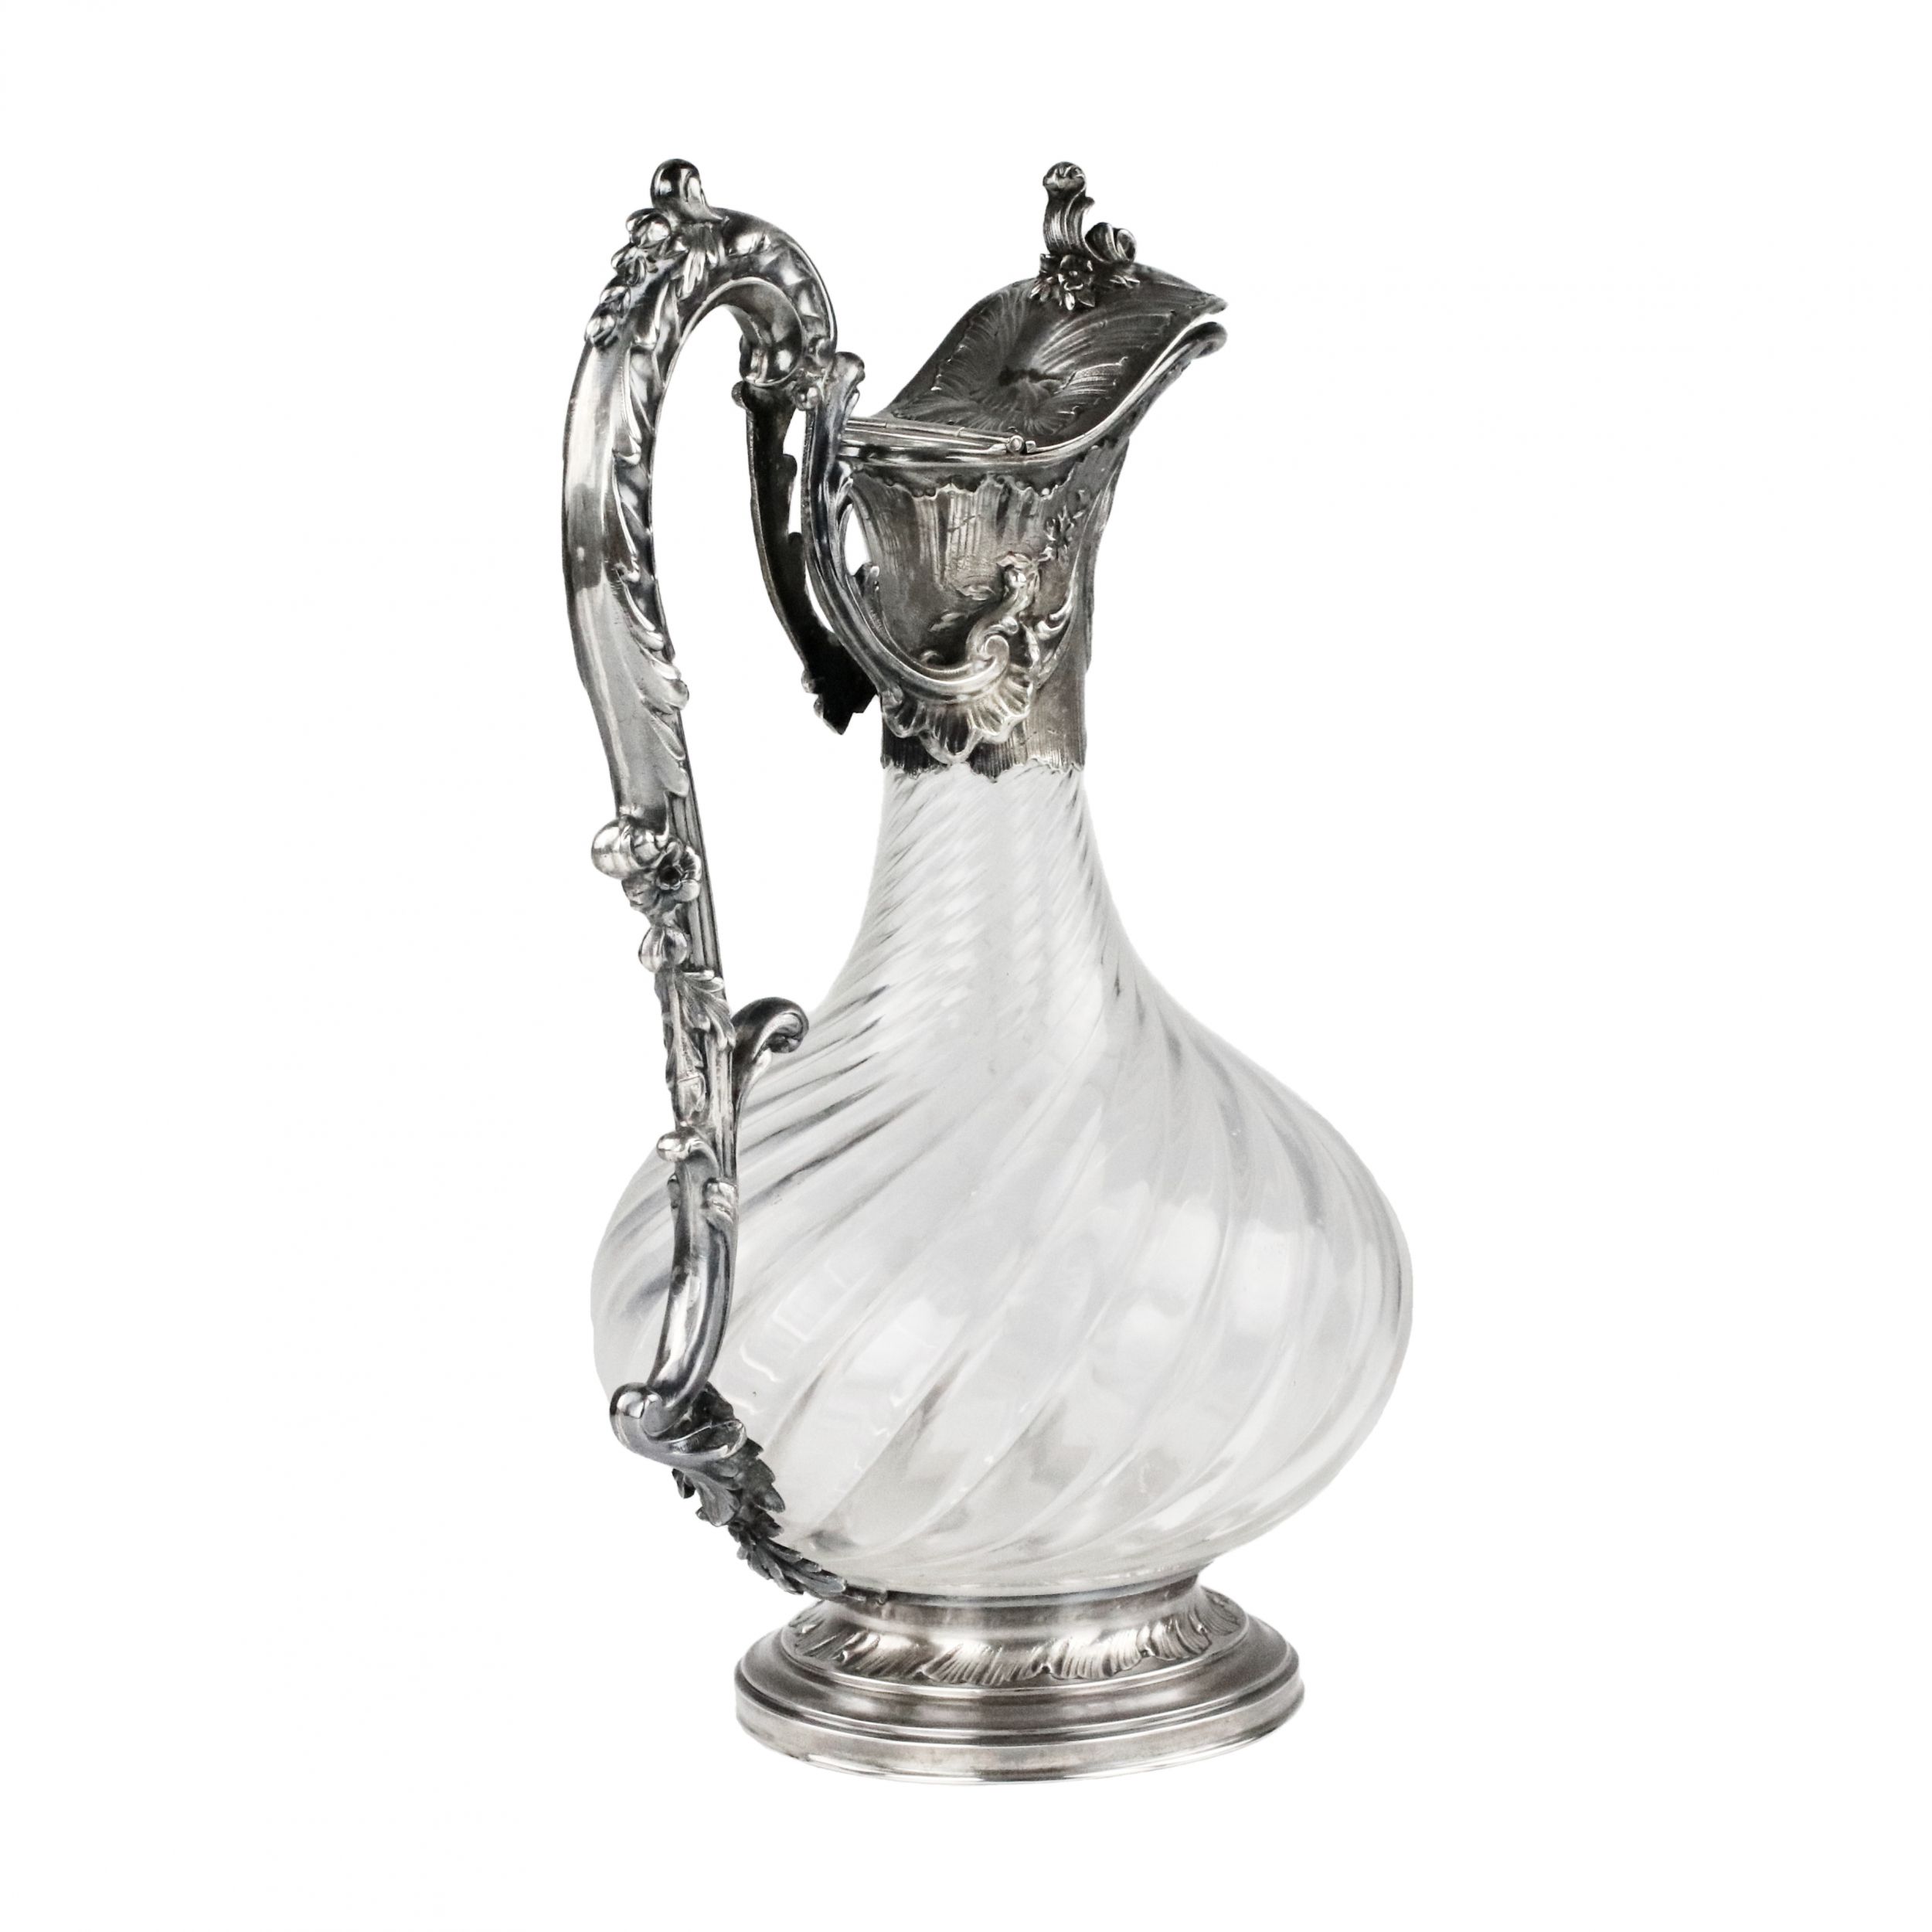 CHEVRON Freres. French crystal jug in silver. - Image 2 of 7